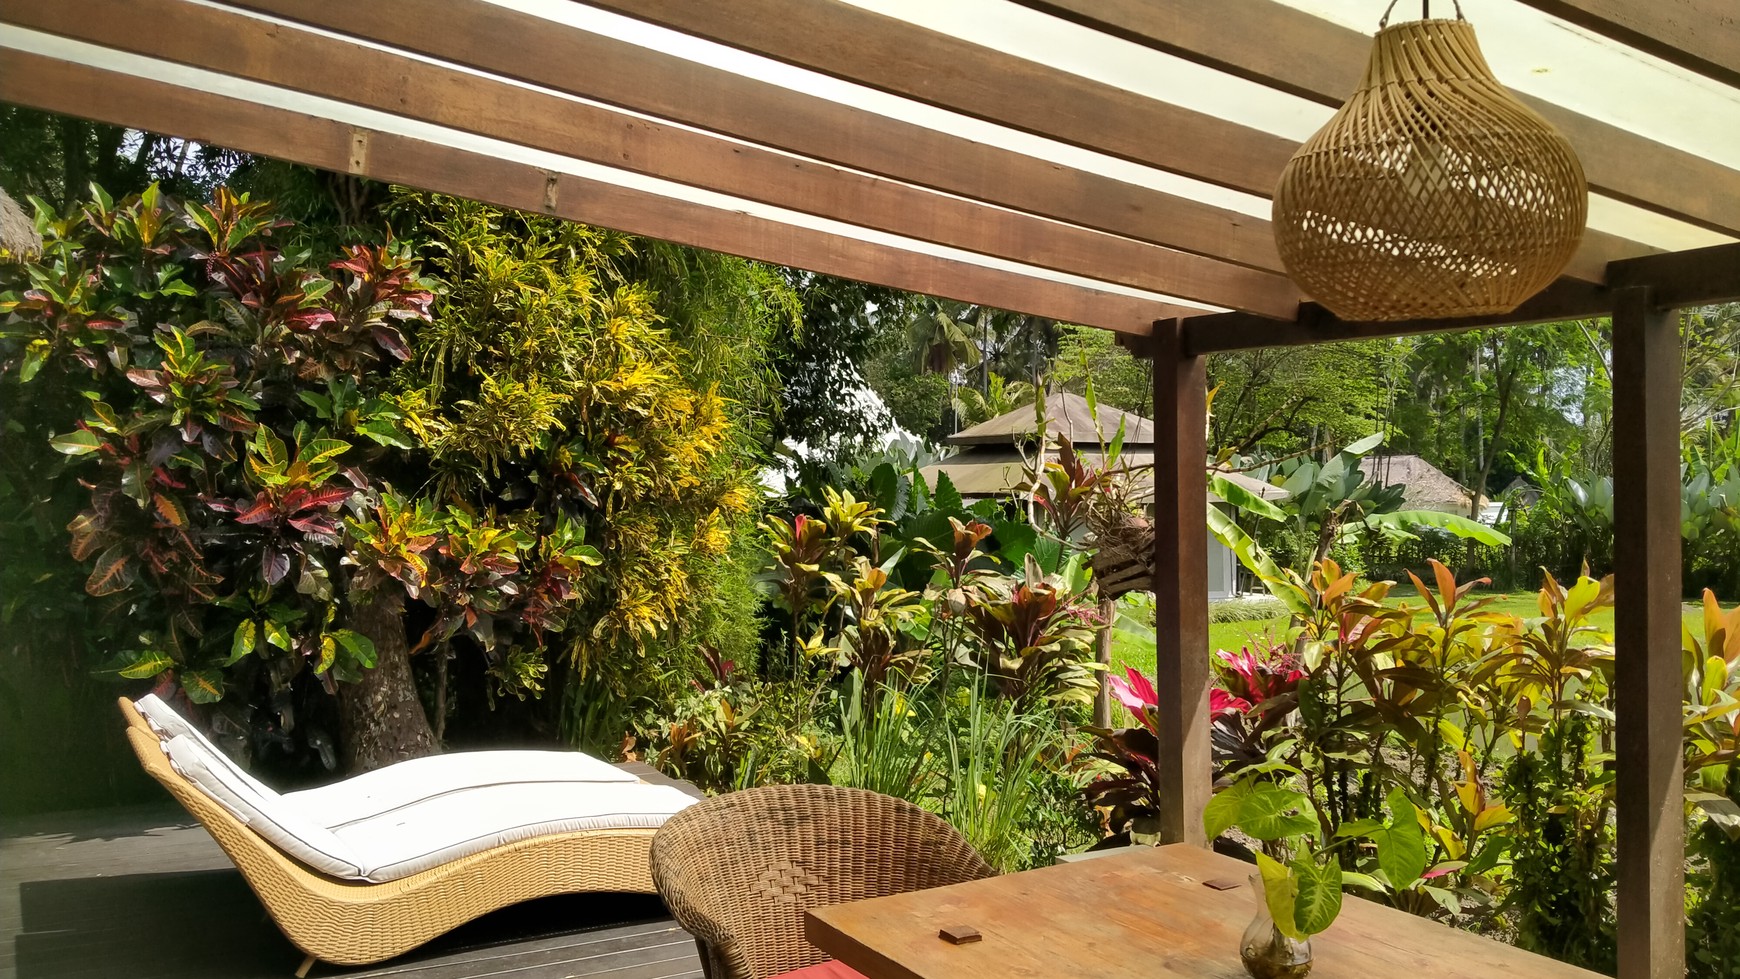 Beautiful 3 Bedroom Leasehold Villa For Sale 10 Minutes From Ubud Center